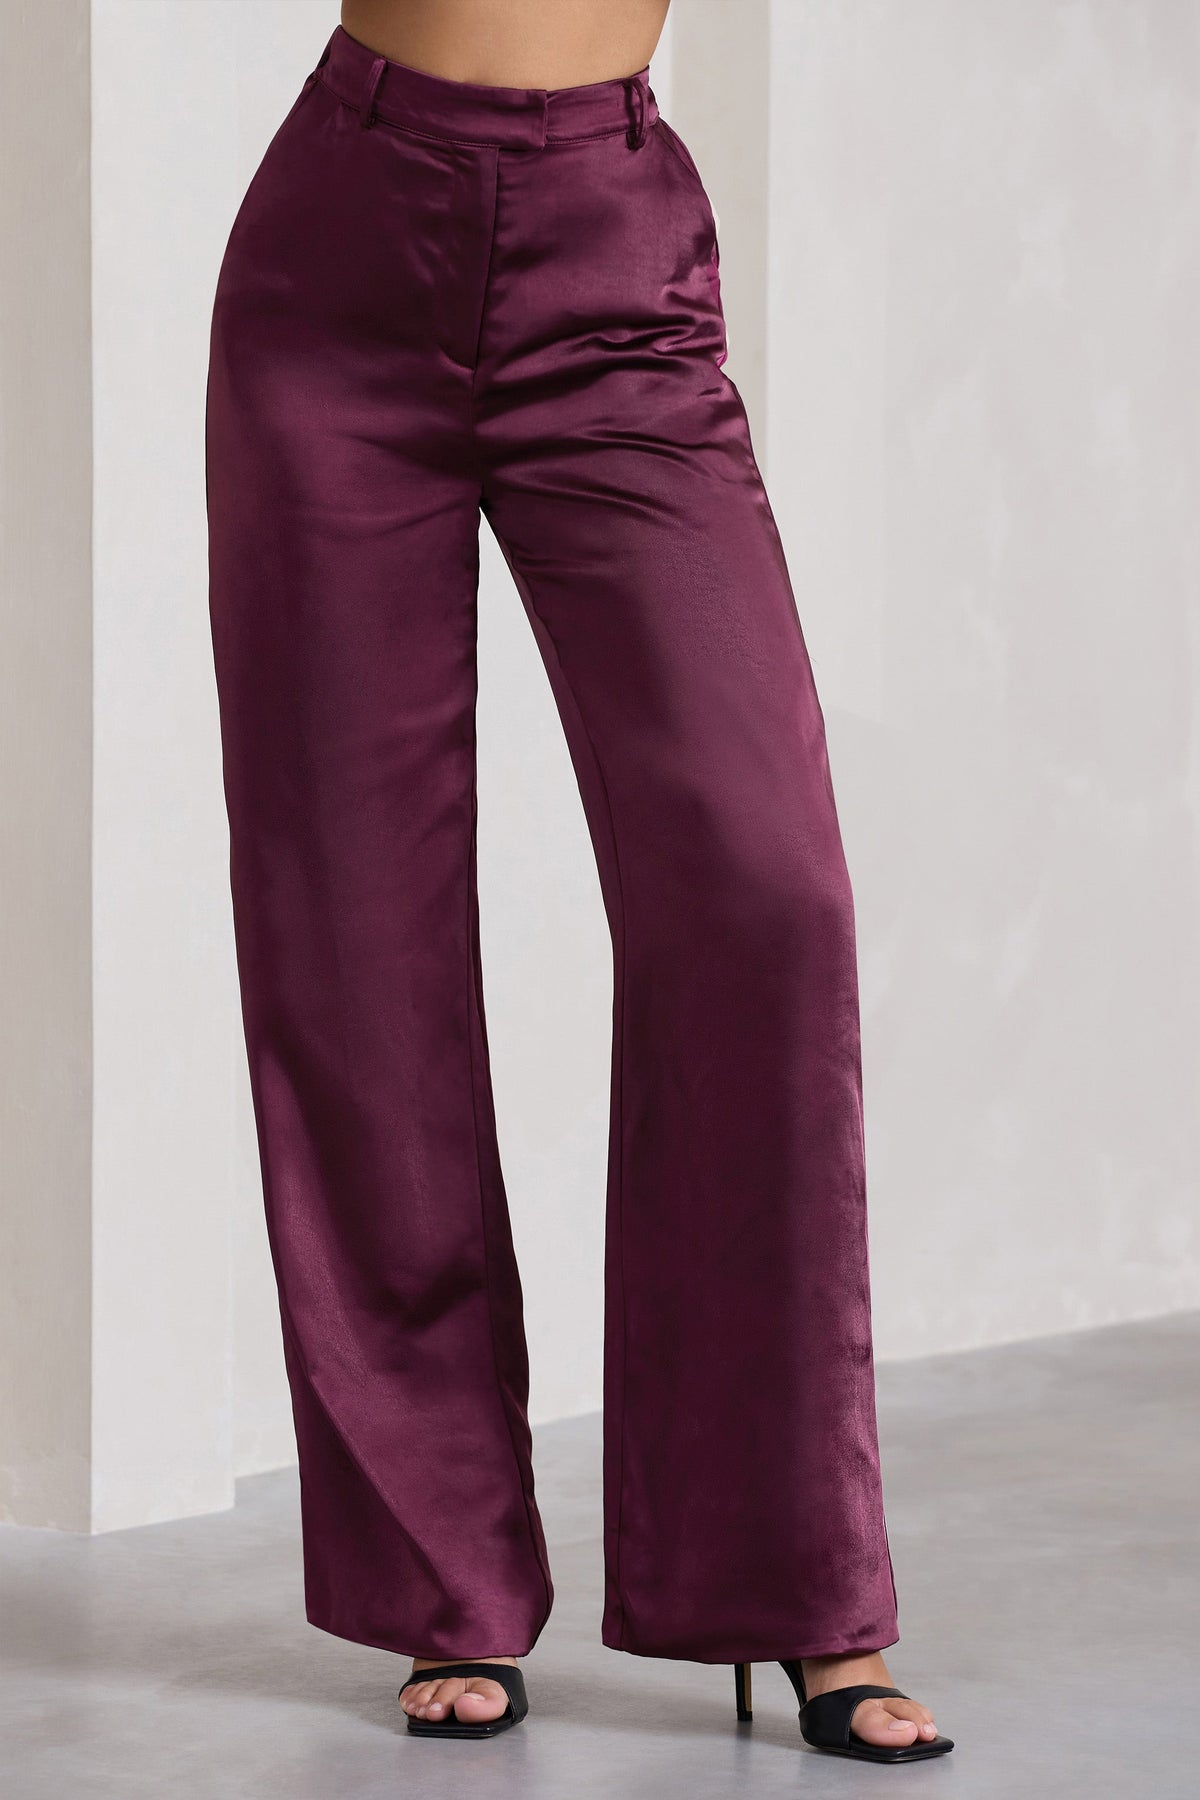 Purple Bell Bottoms Pants for Women, Flared Pants Women, High Waist  Trousers, High Rise Pants for Women, Burgundy Flared Pants Women's -   Canada